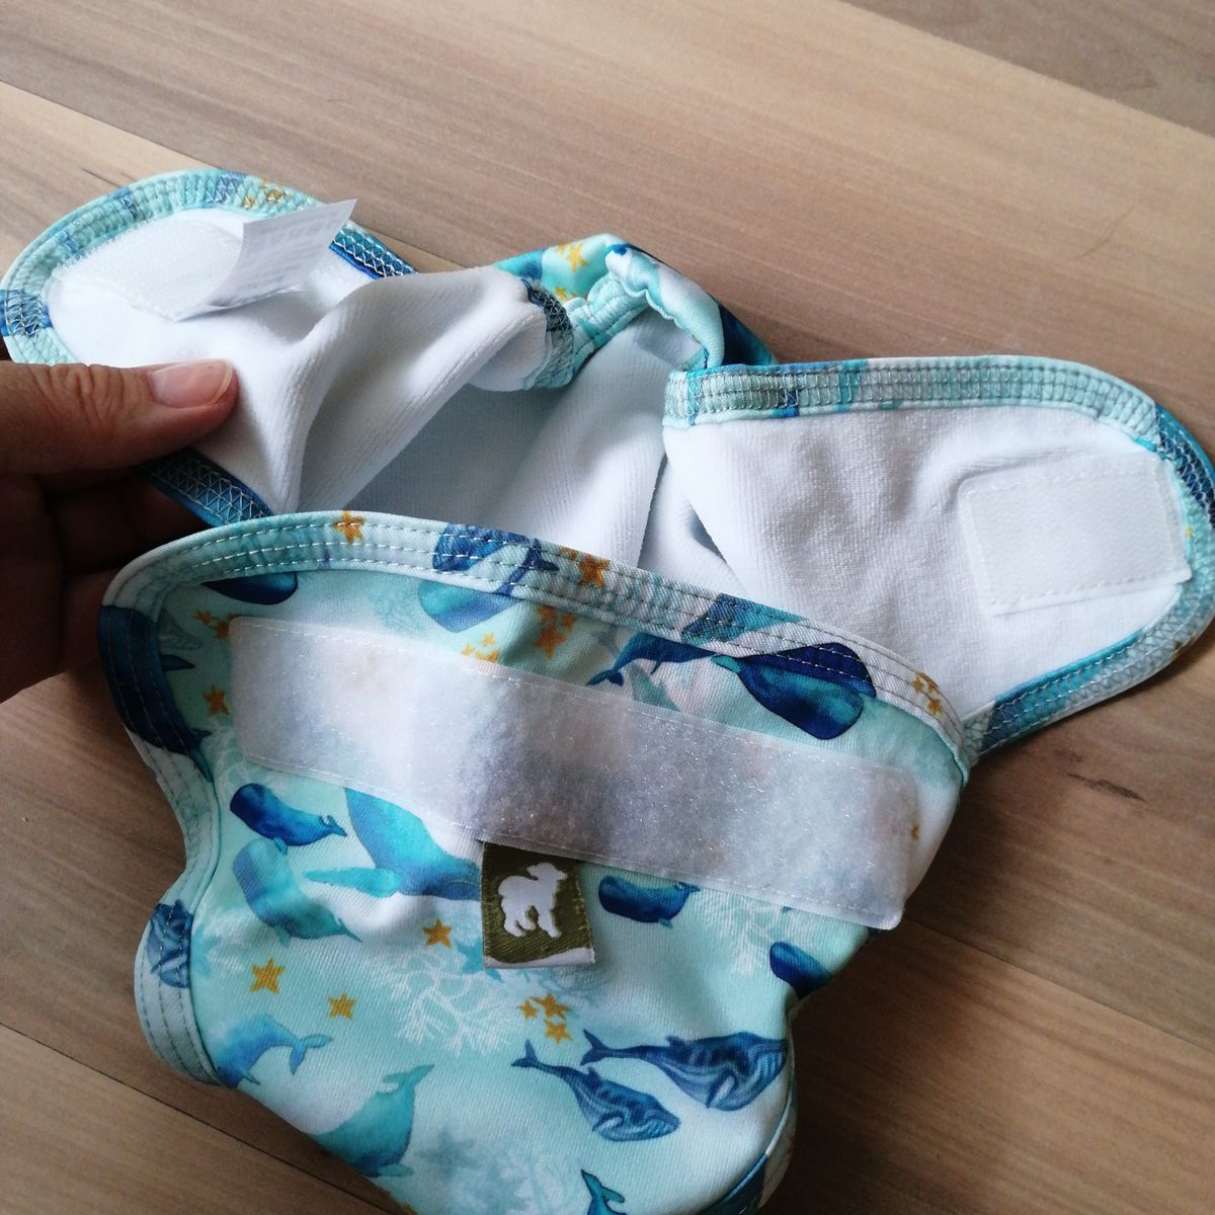 Review: Best Reusable Swim Nappies for Eco-Friendly Families